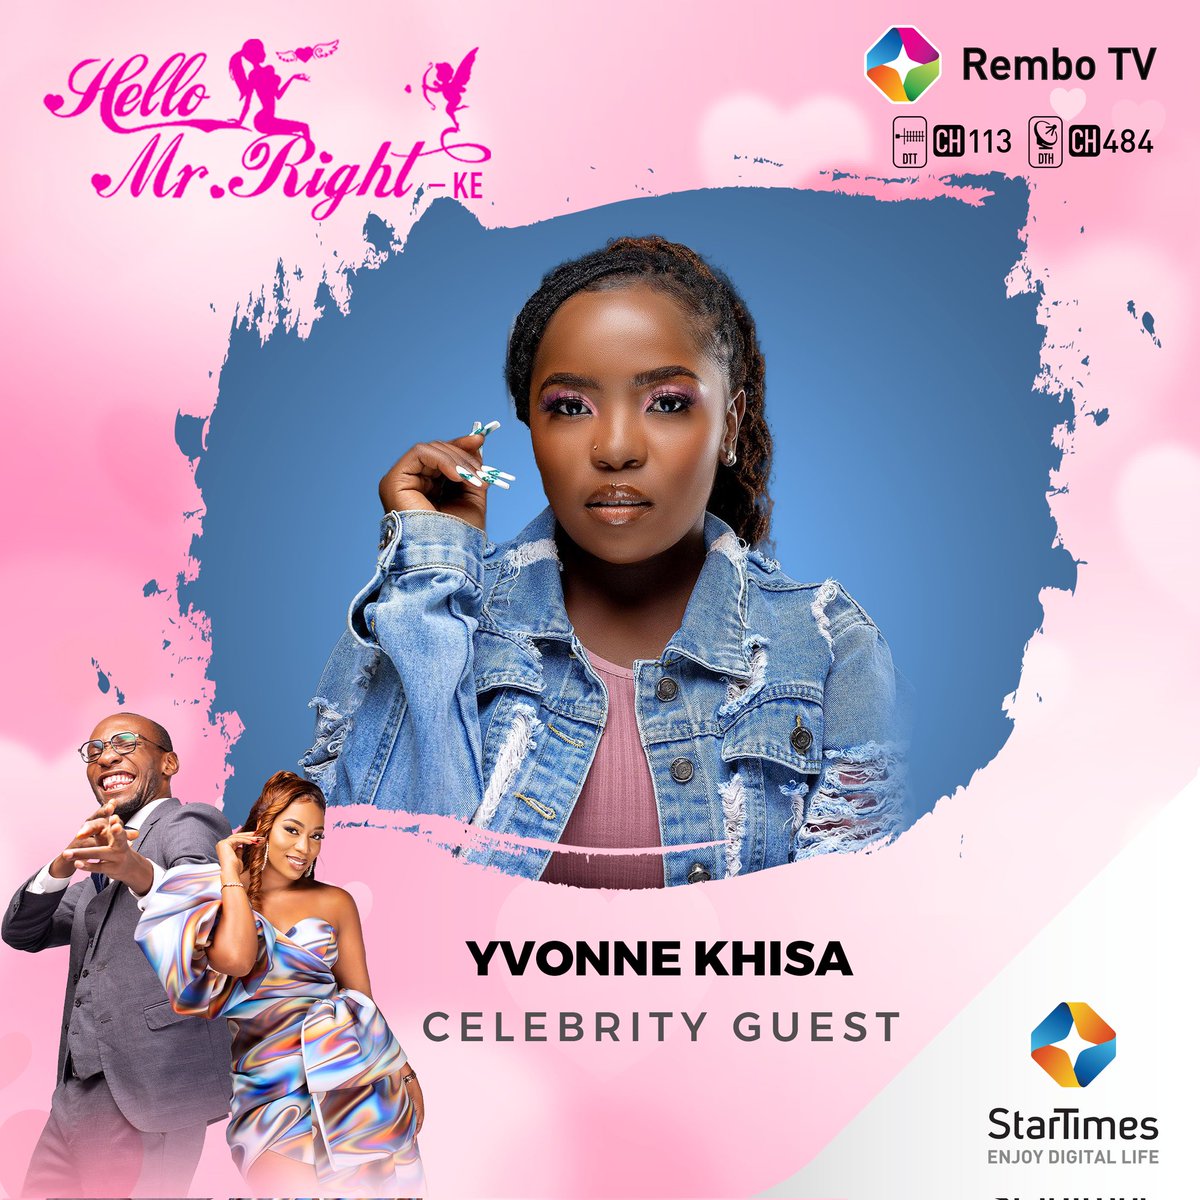 Make sure you tune in to the show tonight. Yvonne Khisa tonight's celebrity guest is a comedian and she'll probably have some great input for the ladies. Watch it from 8 on @Strembotv @StarTimesKenya #MoreValue #SisiNdioBabaYao